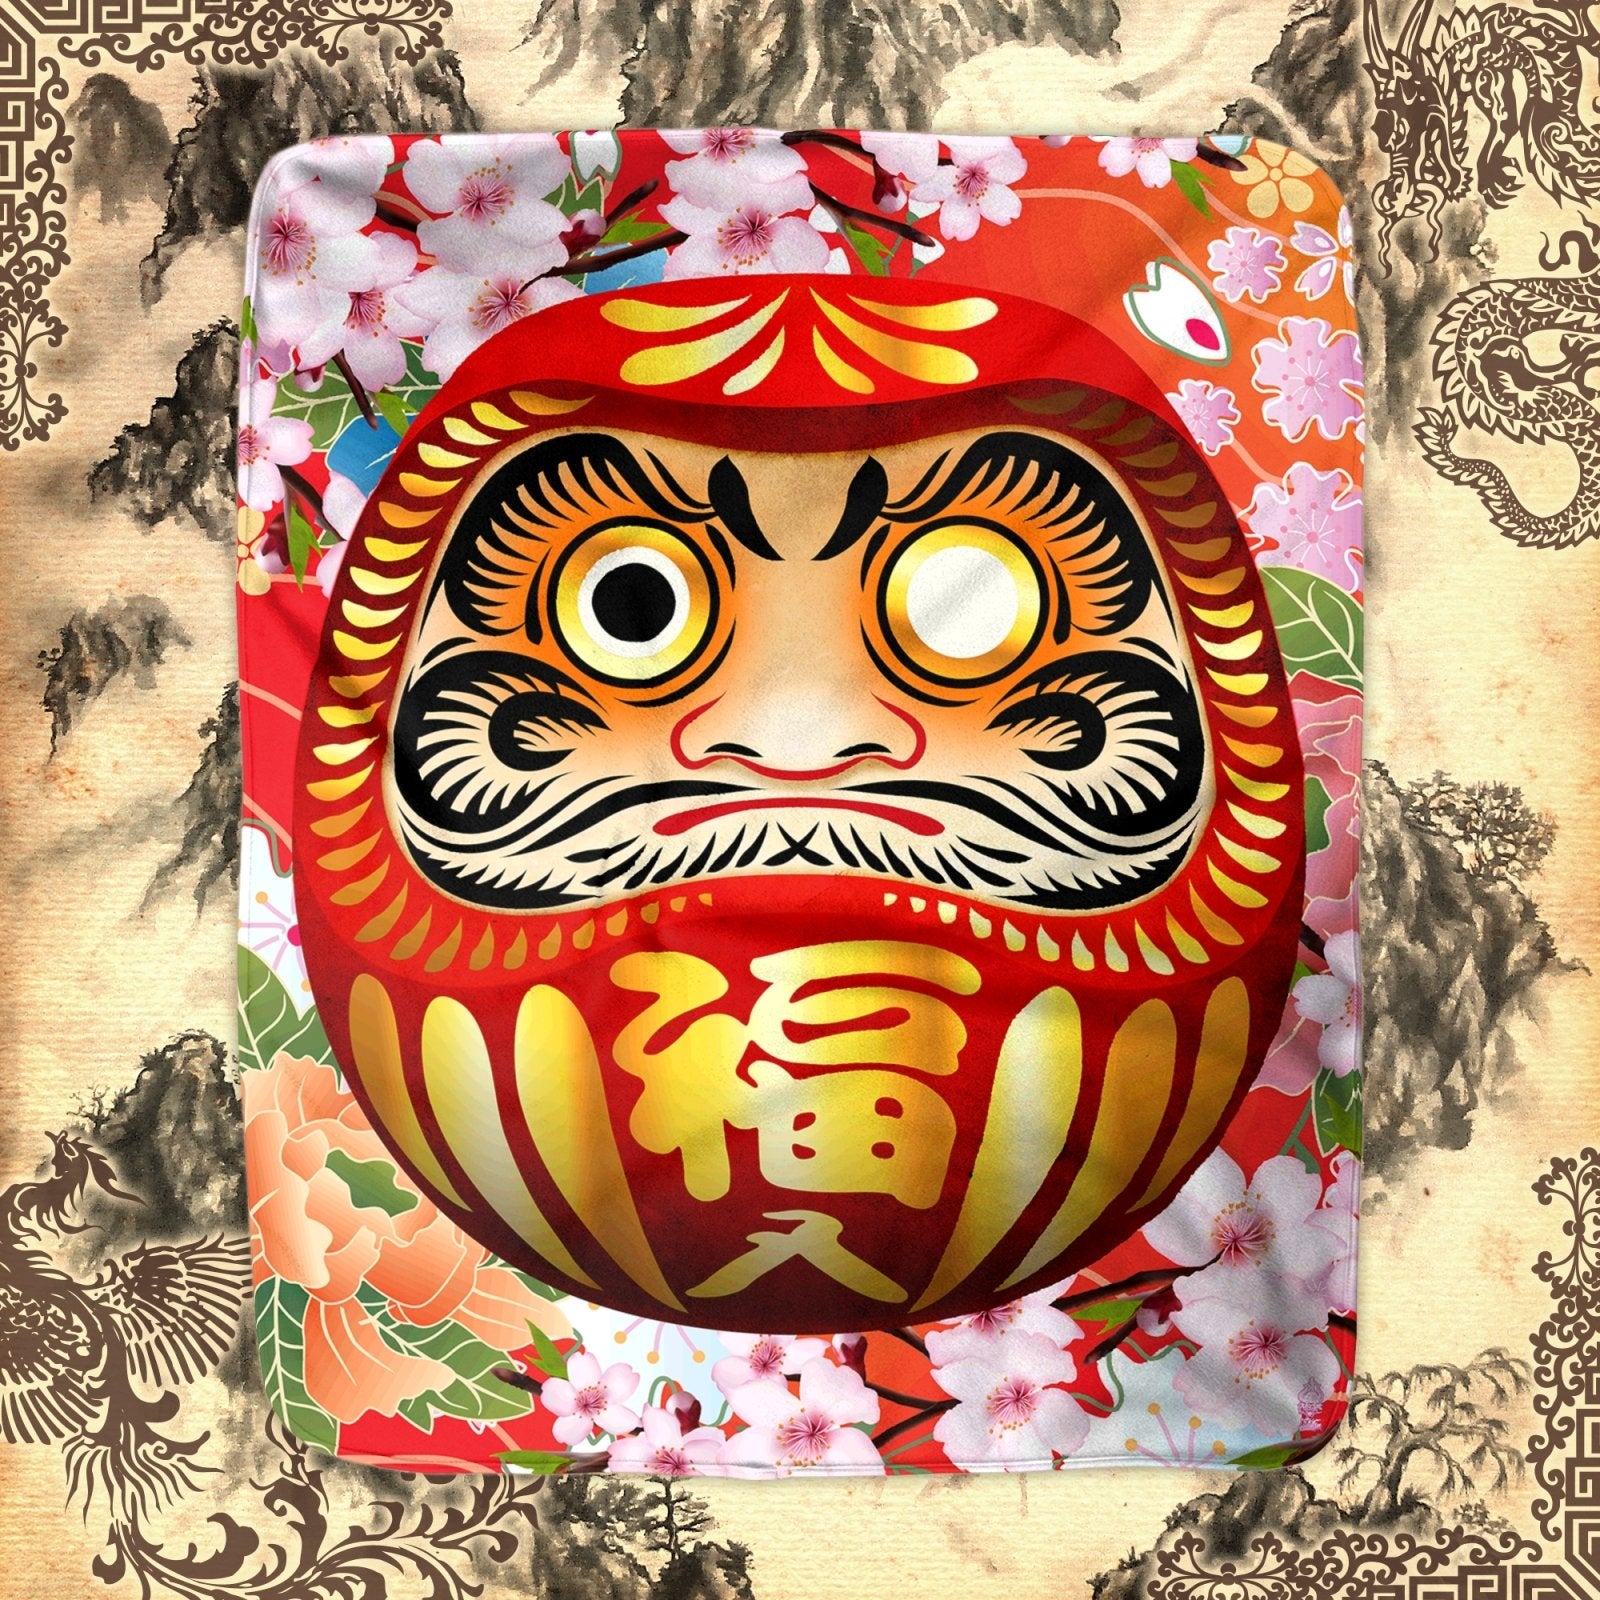 Daruma Throw Fleece Blanket, Japanese Anime and Manga, Indie and Ecclectic Decor, Eclectic and Funky Gift - Red - Abysm Internal